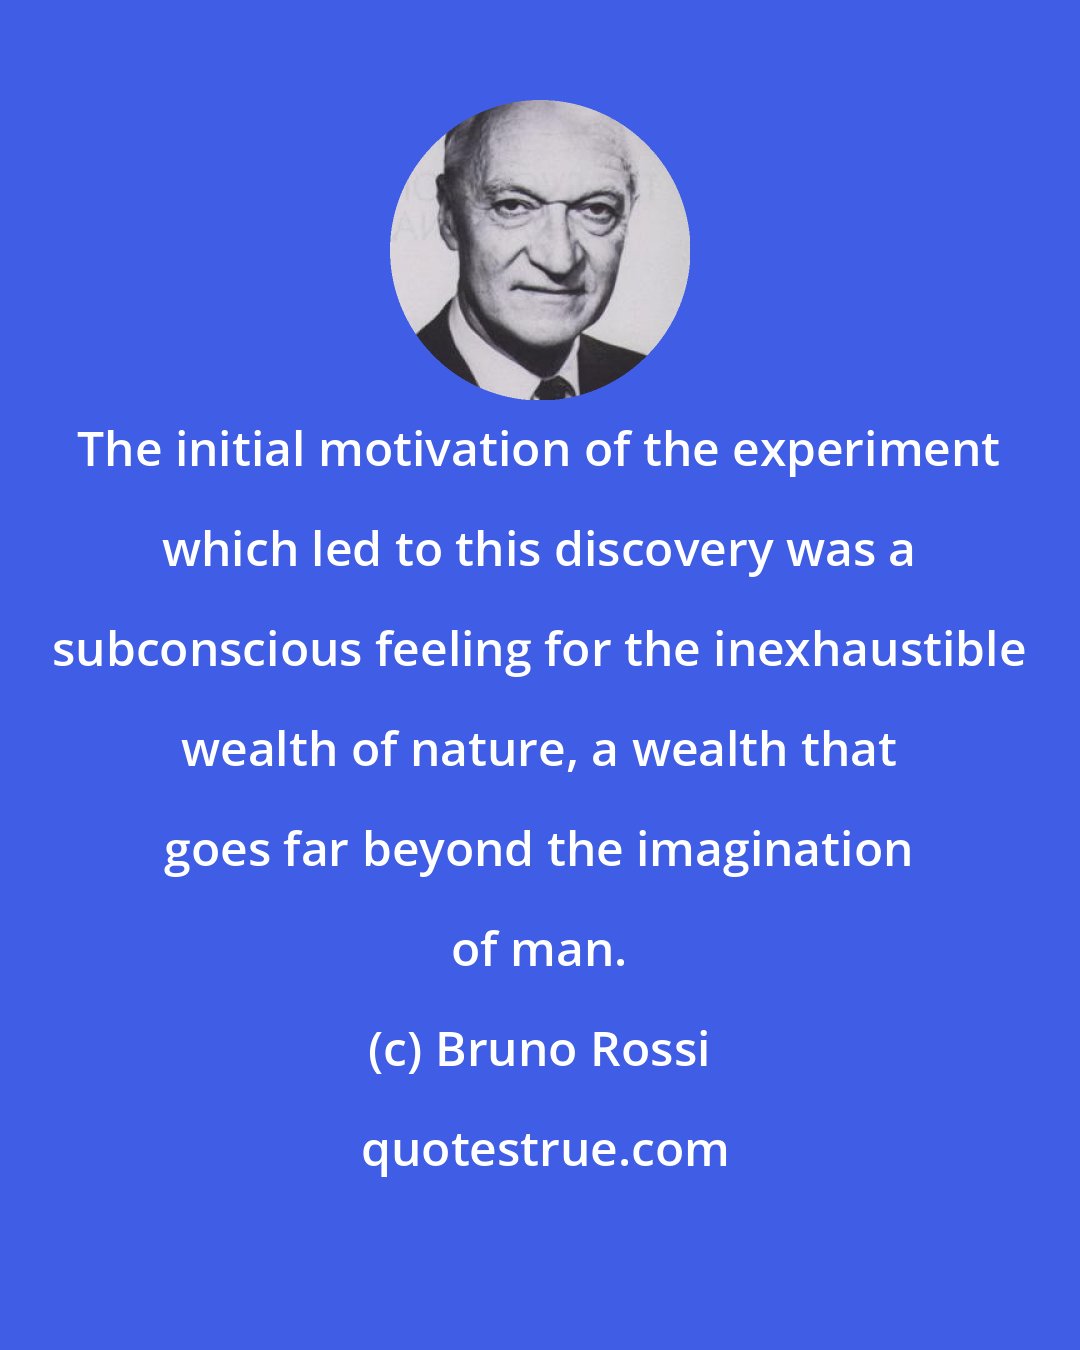 Bruno Rossi: The initial motivation of the experiment which led to this discovery was a subconscious feeling for the inexhaustible wealth of nature, a wealth that goes far beyond the imagination of man.